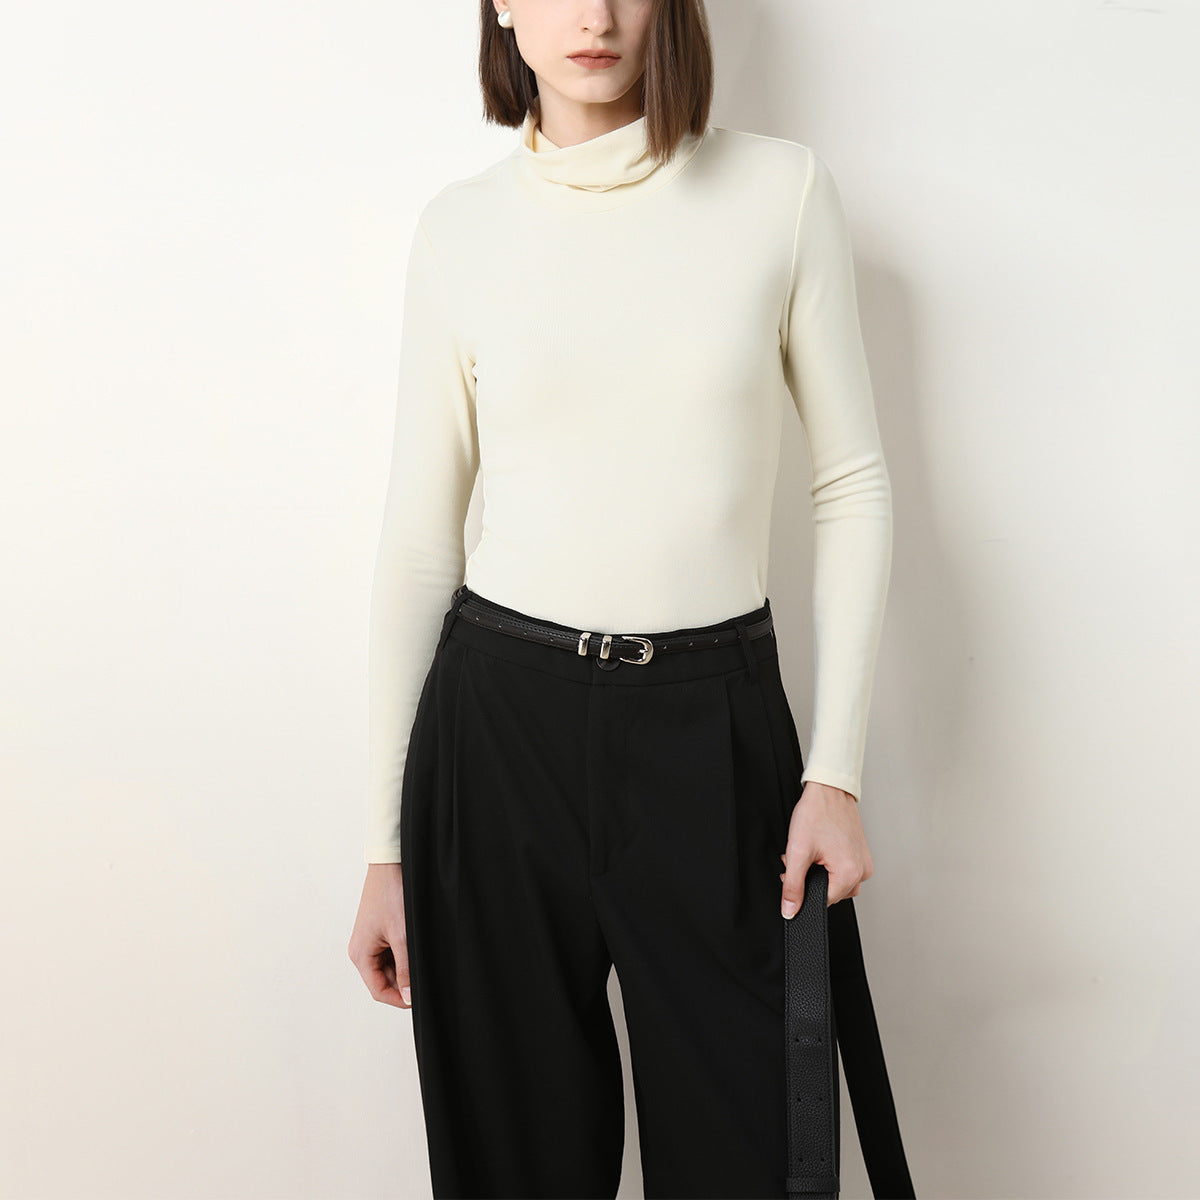 Autumn and Winter High Neck Milled Slim Top Women